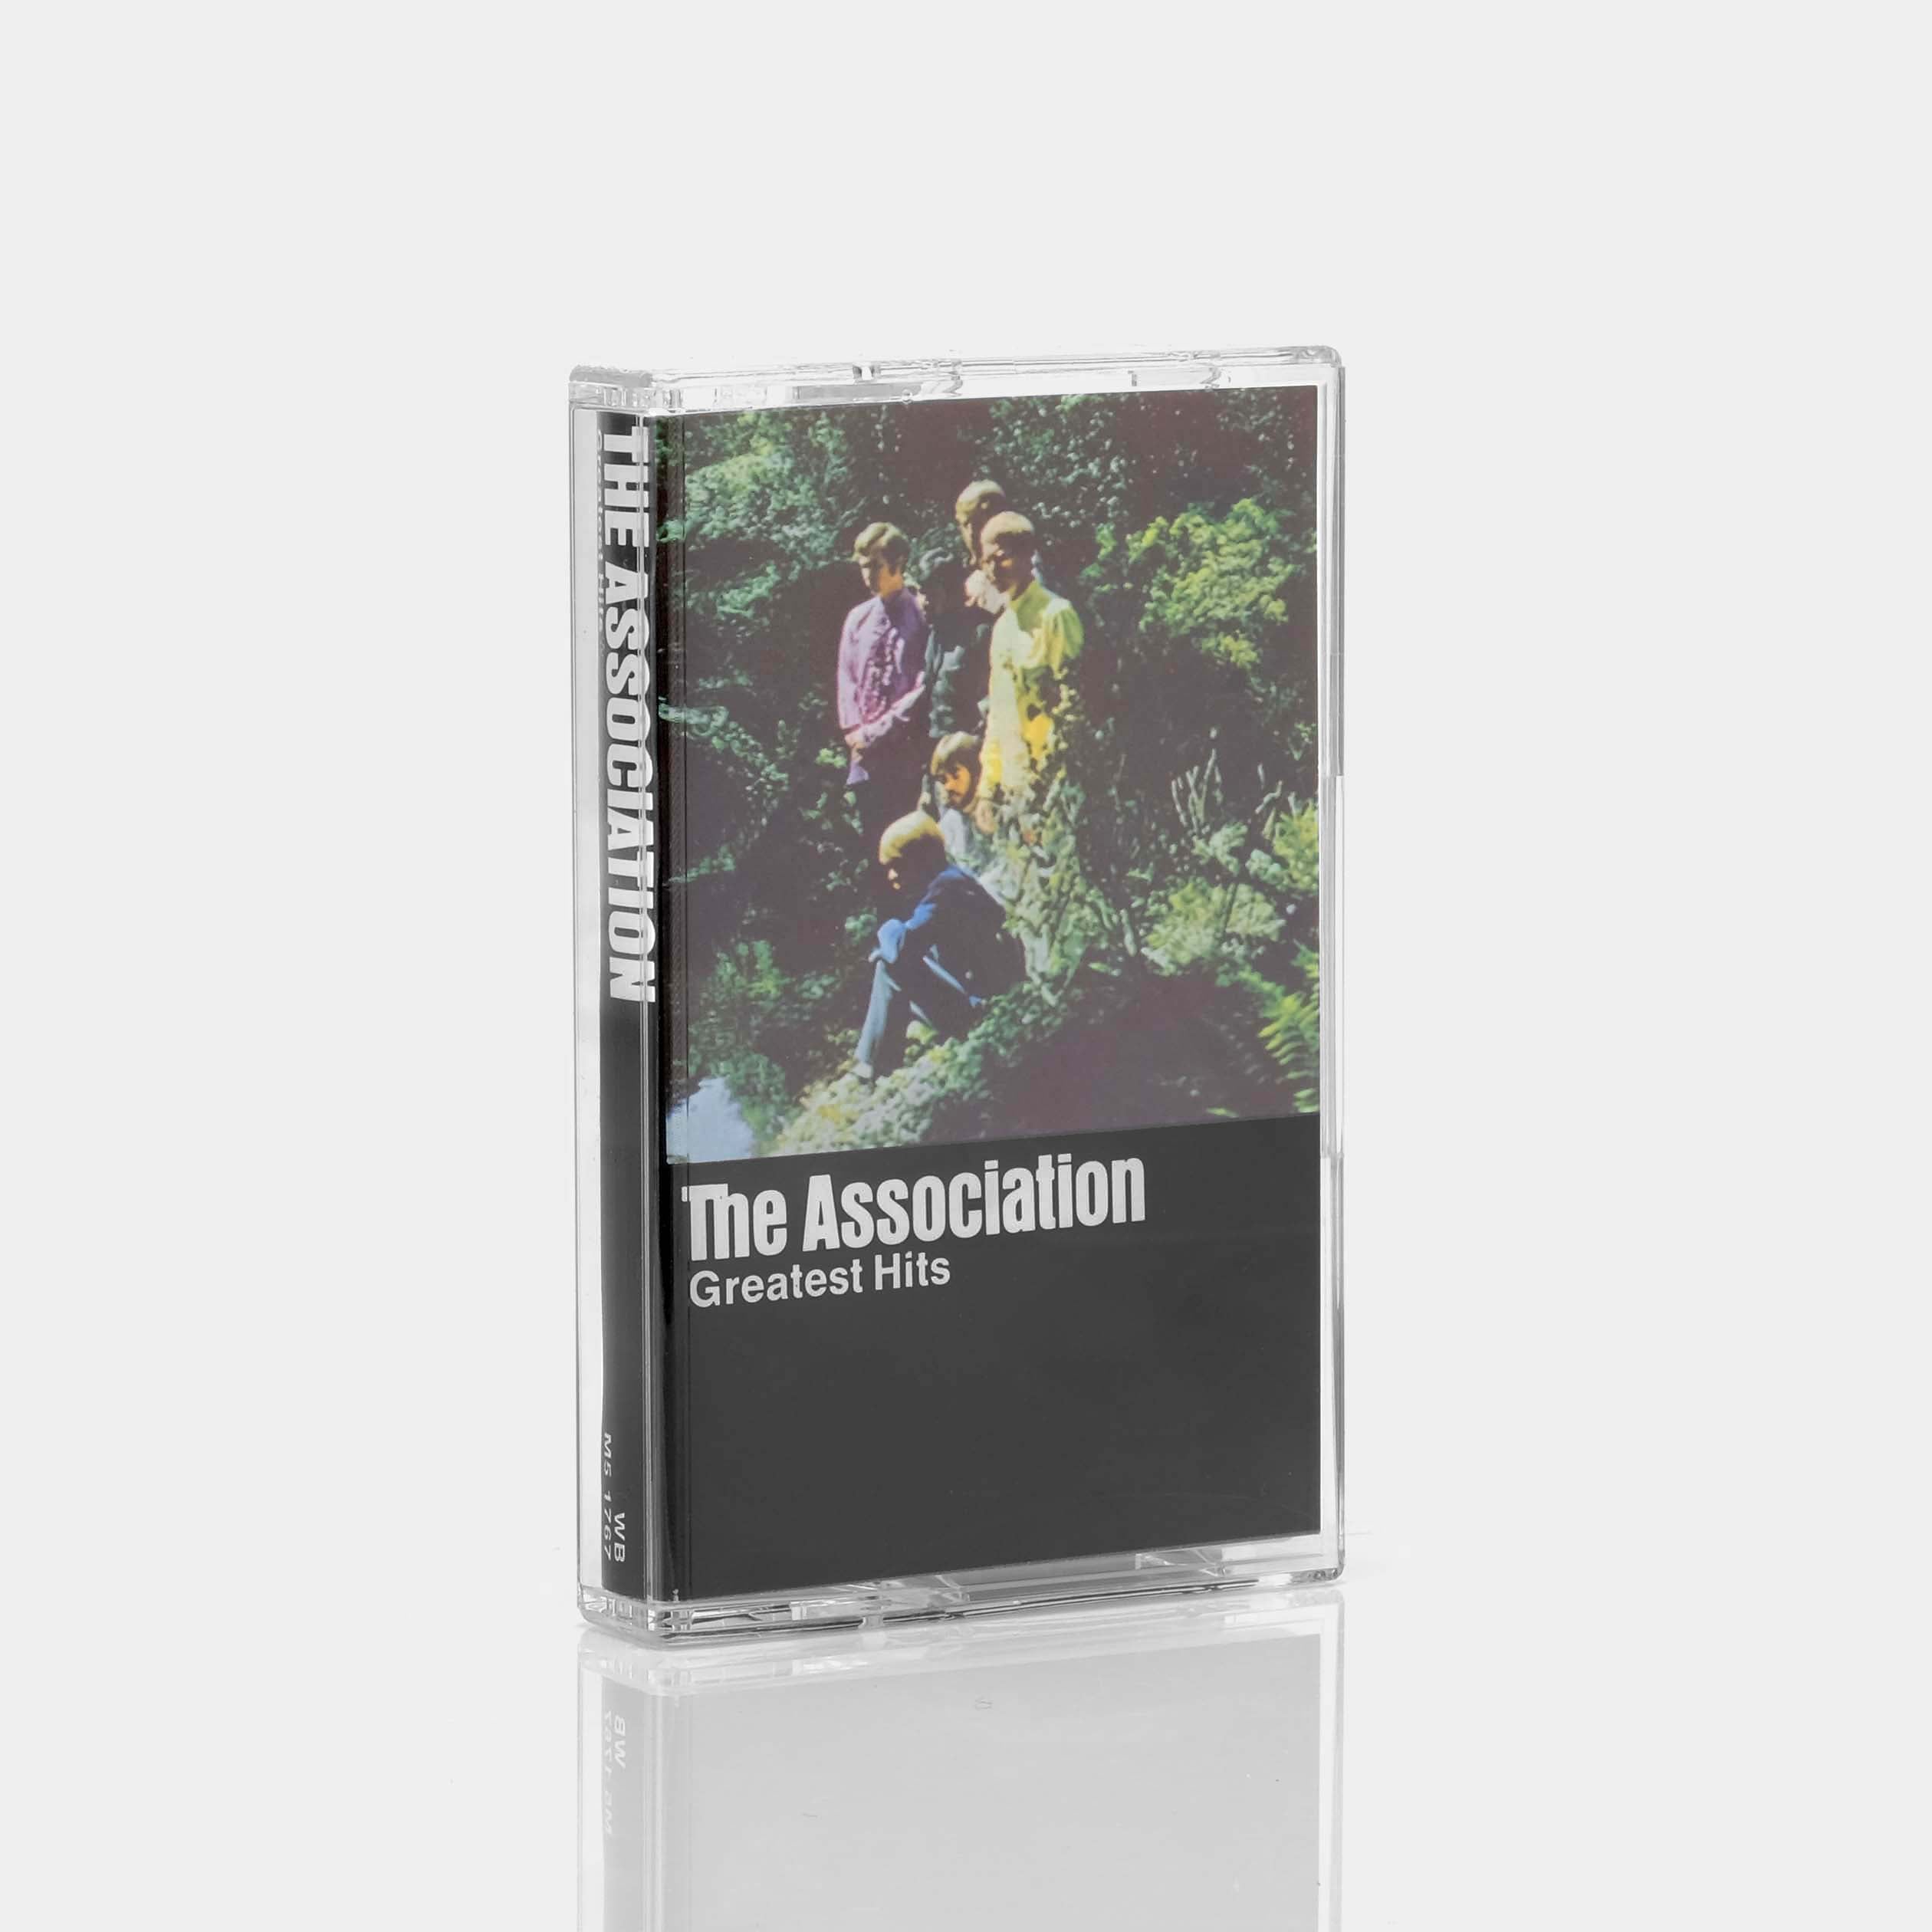 The Association - Greatest Hits Cassette Tape